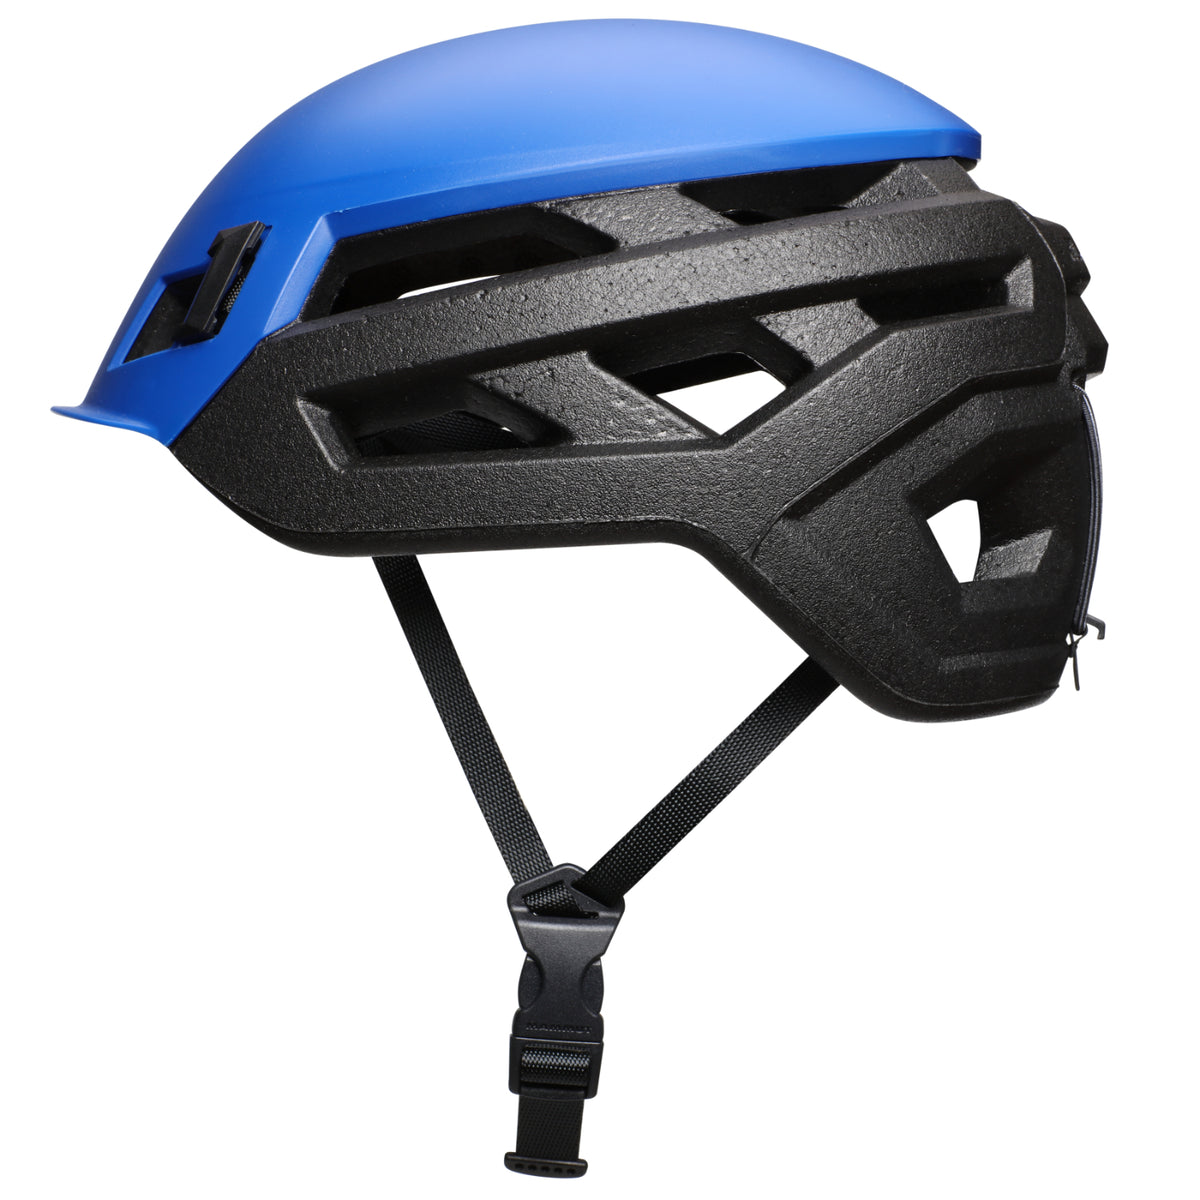 Mammut Wall Rider helmet in surf blue and black colour, from the side view